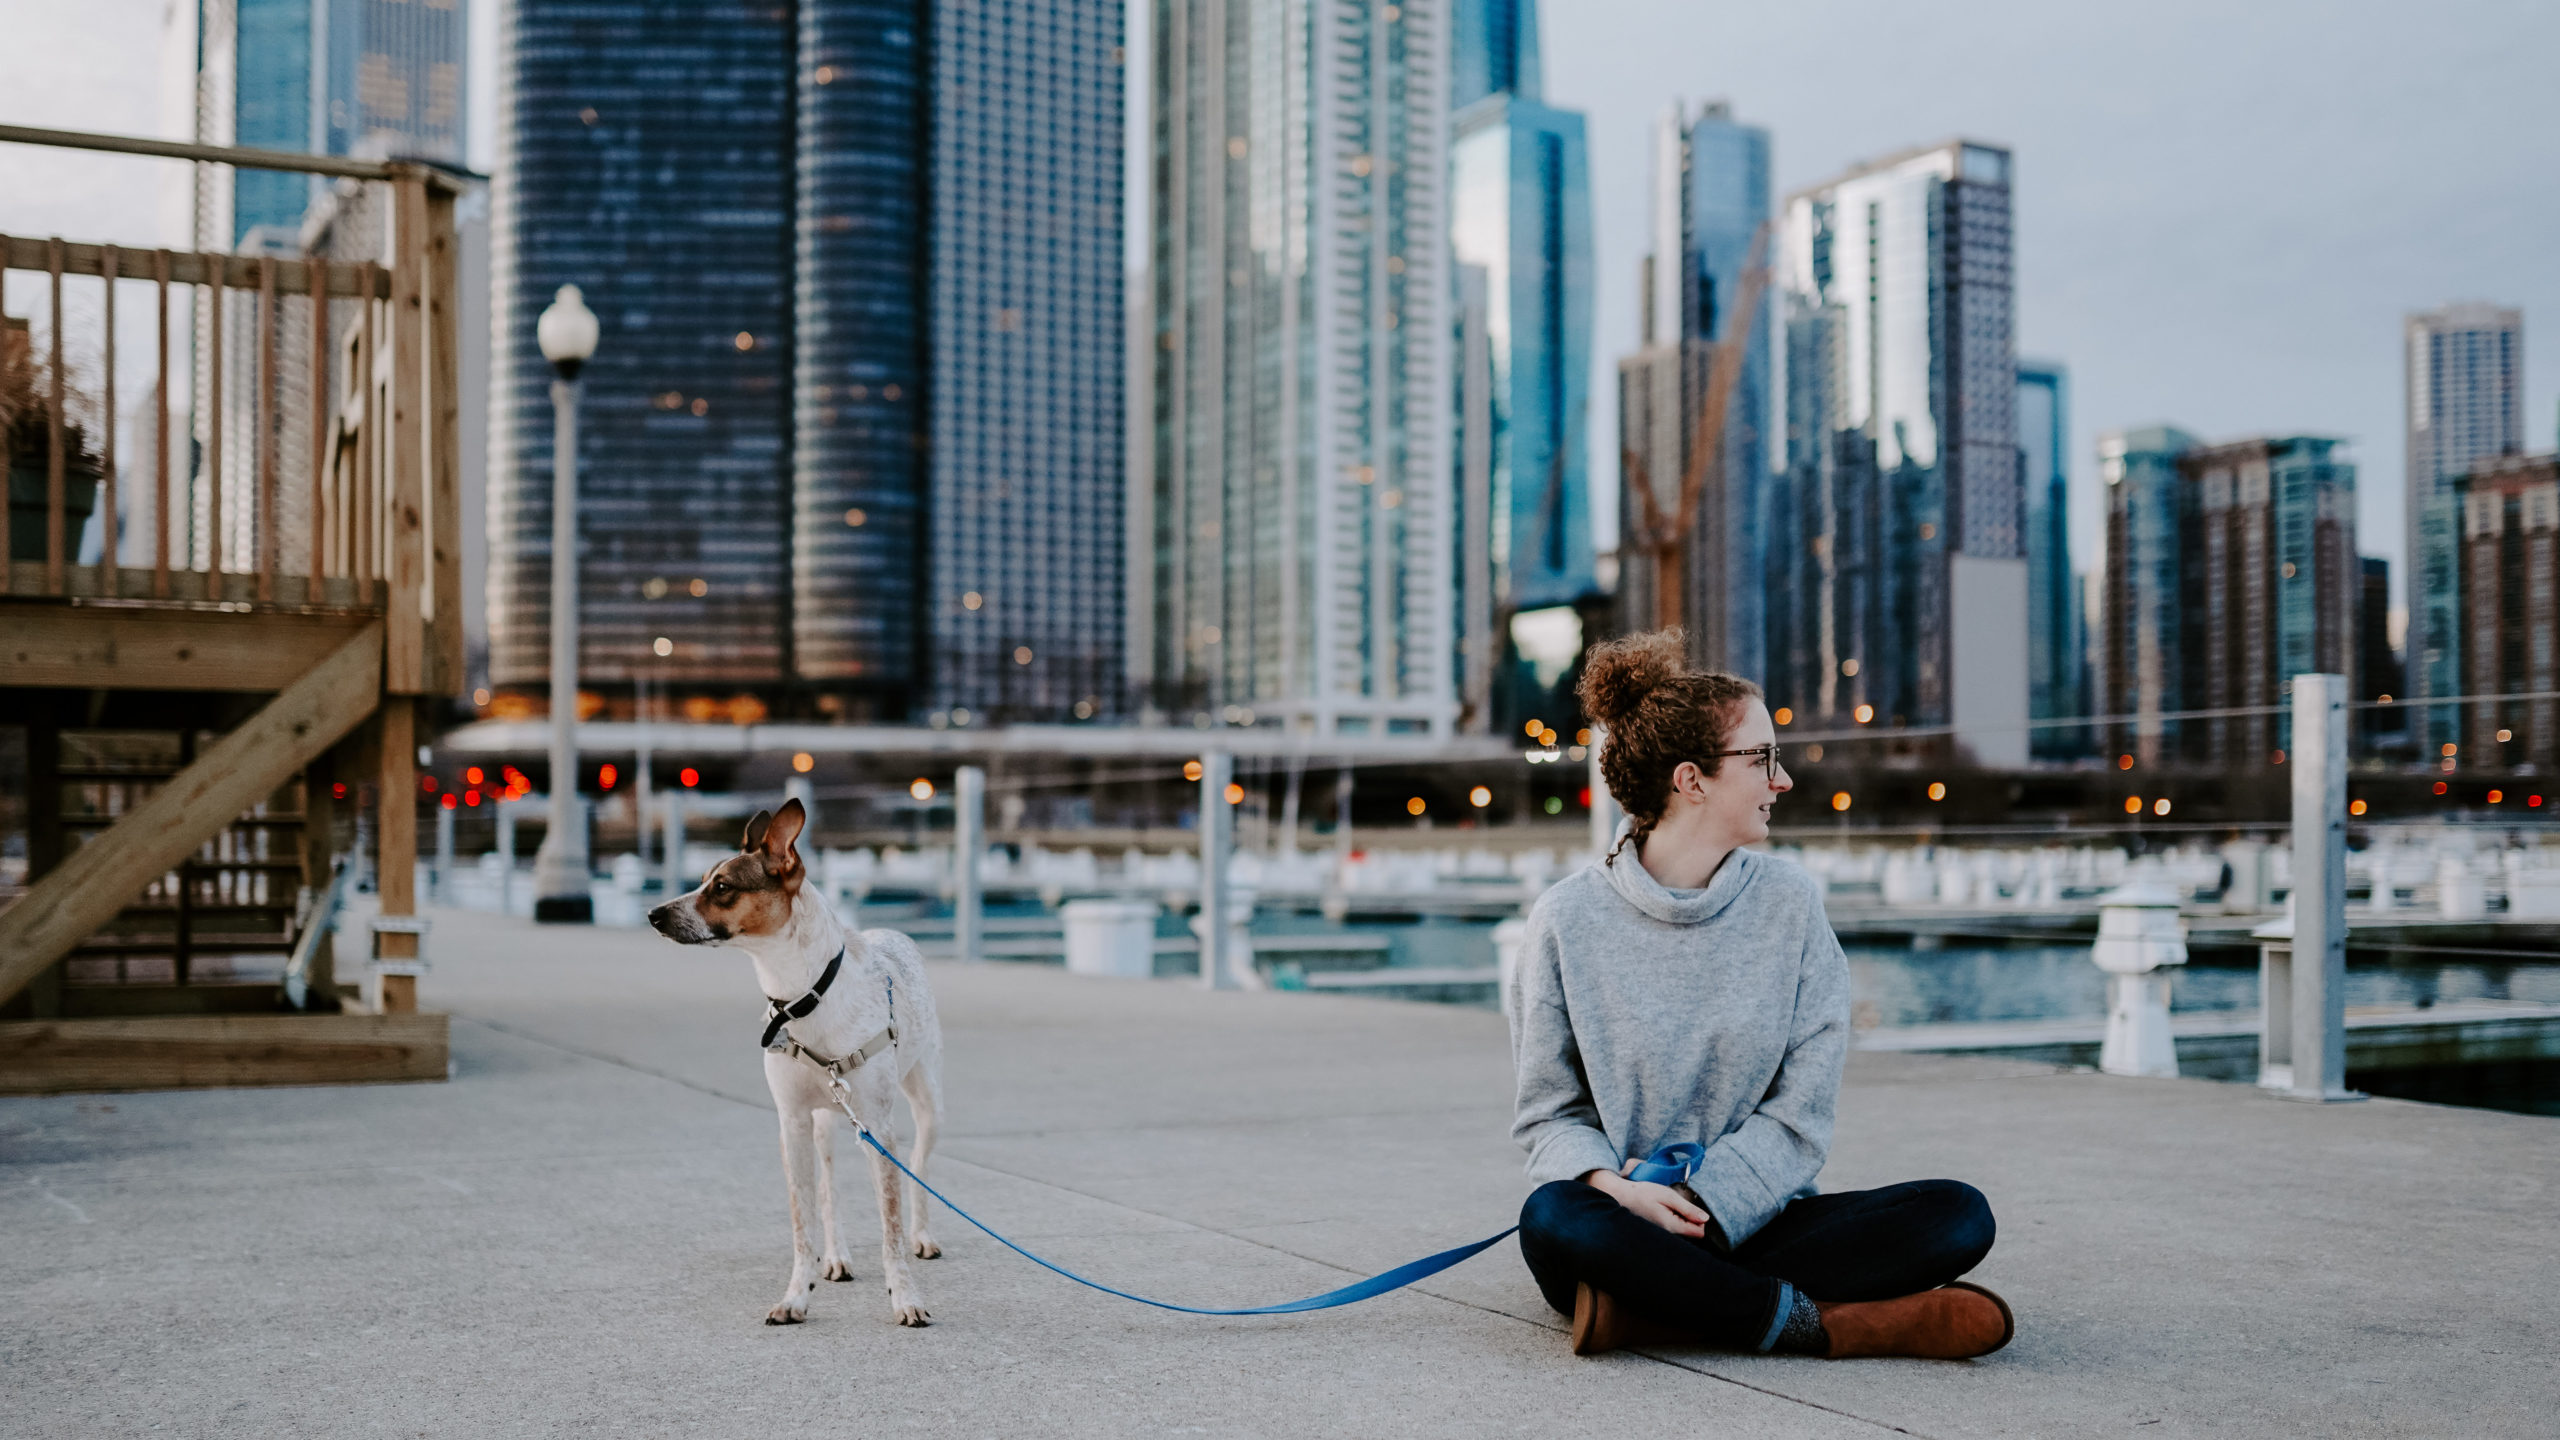 My partner and dog on the Lake Michigan pier in Chicago